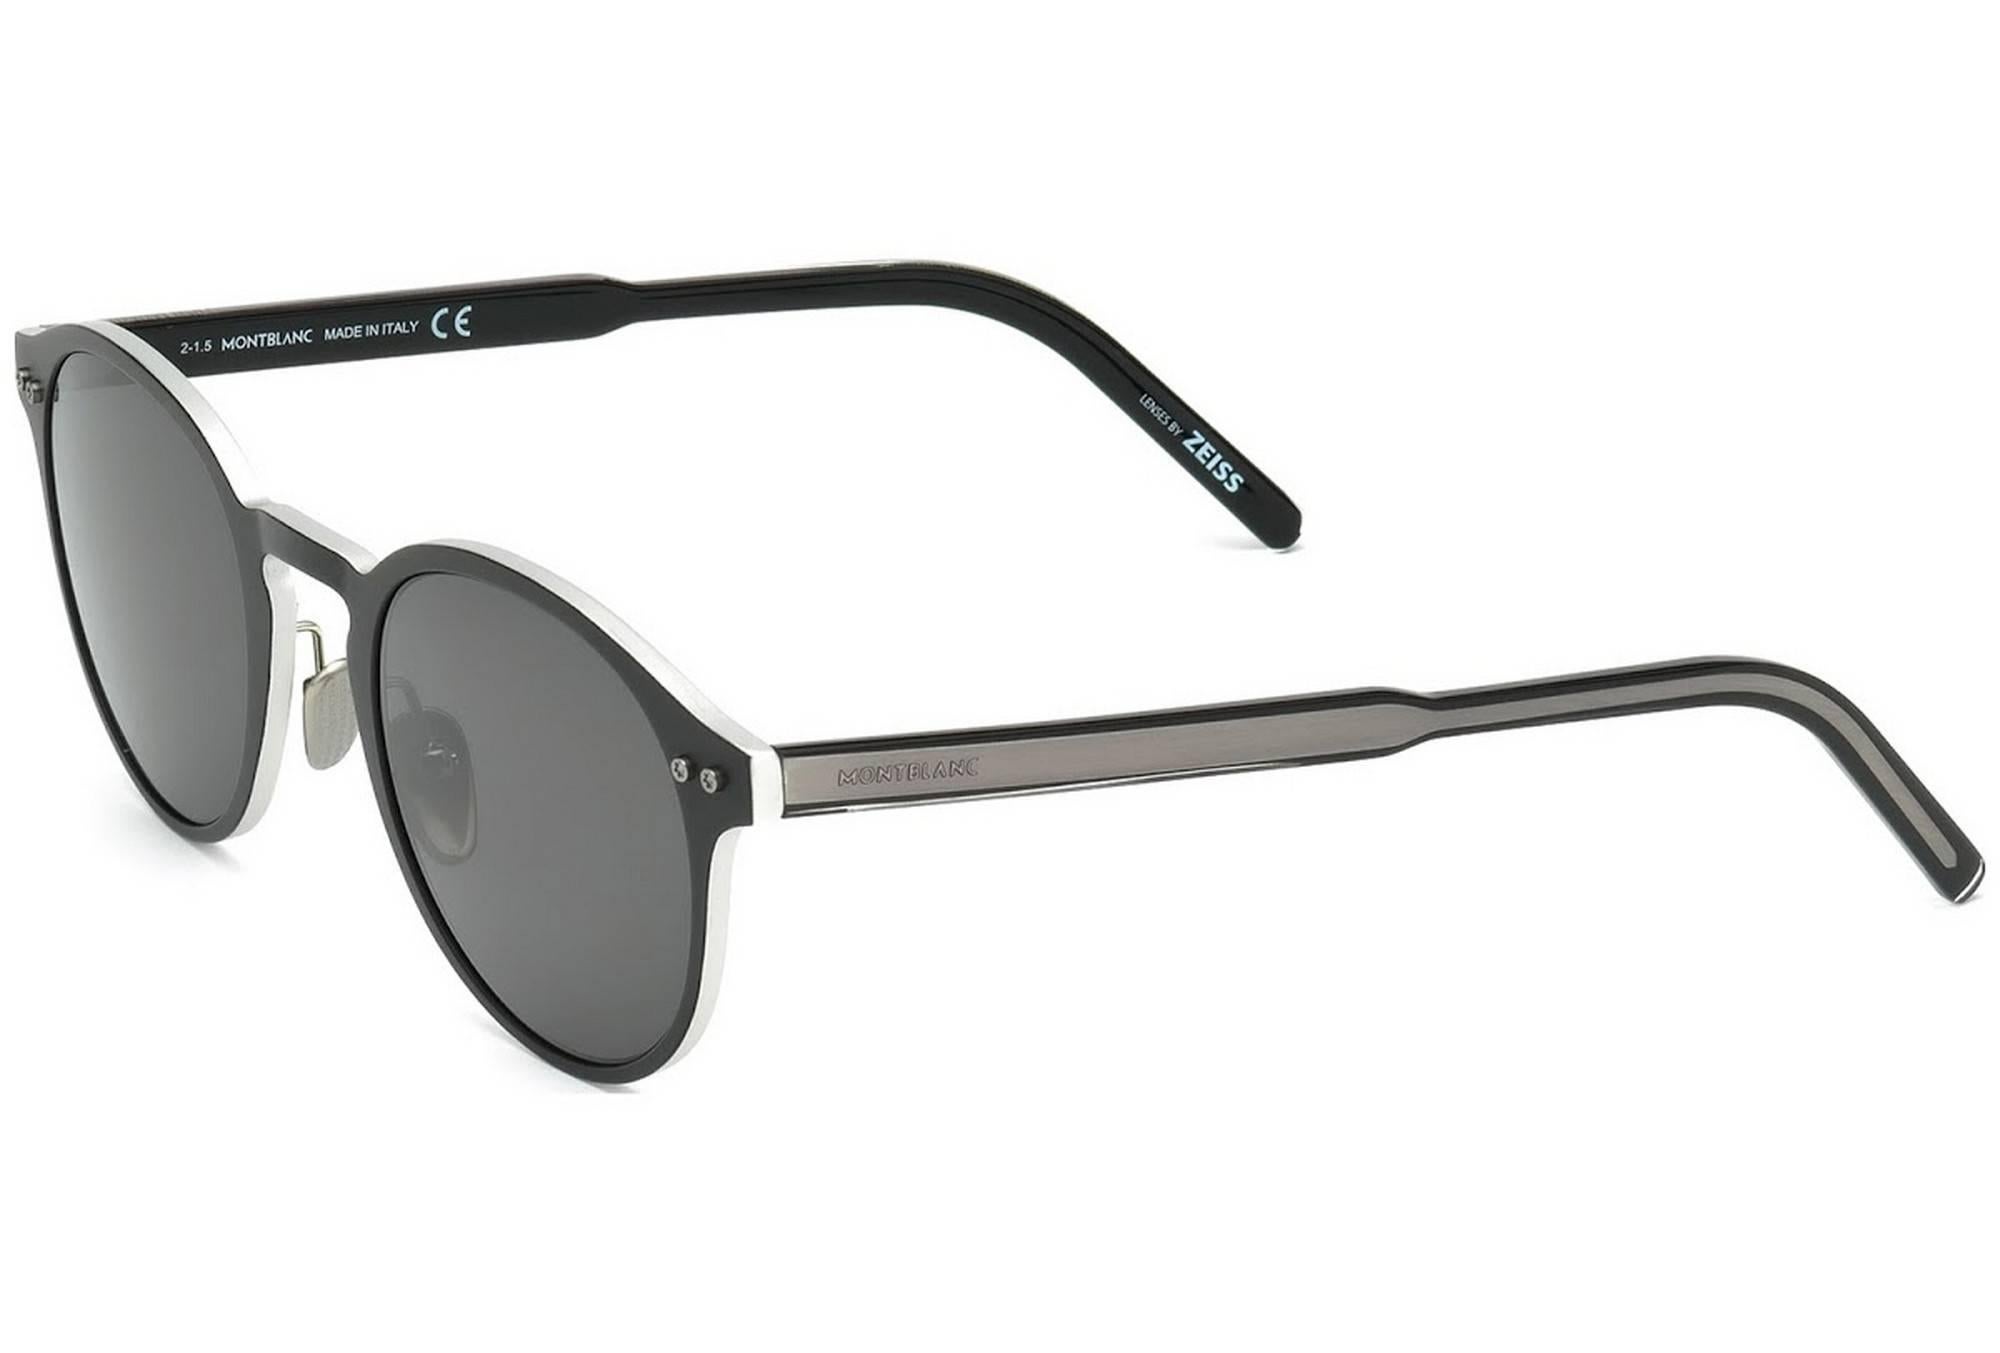 Montblanc MB585S-02A-50 Metal Matte Black - Smoke Sunglasses
Brand: Montblanc
Style Code: MB585S-02A-50
Frame: Metal
Color: Matte Black - Smoke
Brand new condition. 
Original case and cloth included. 
Made in Italy.